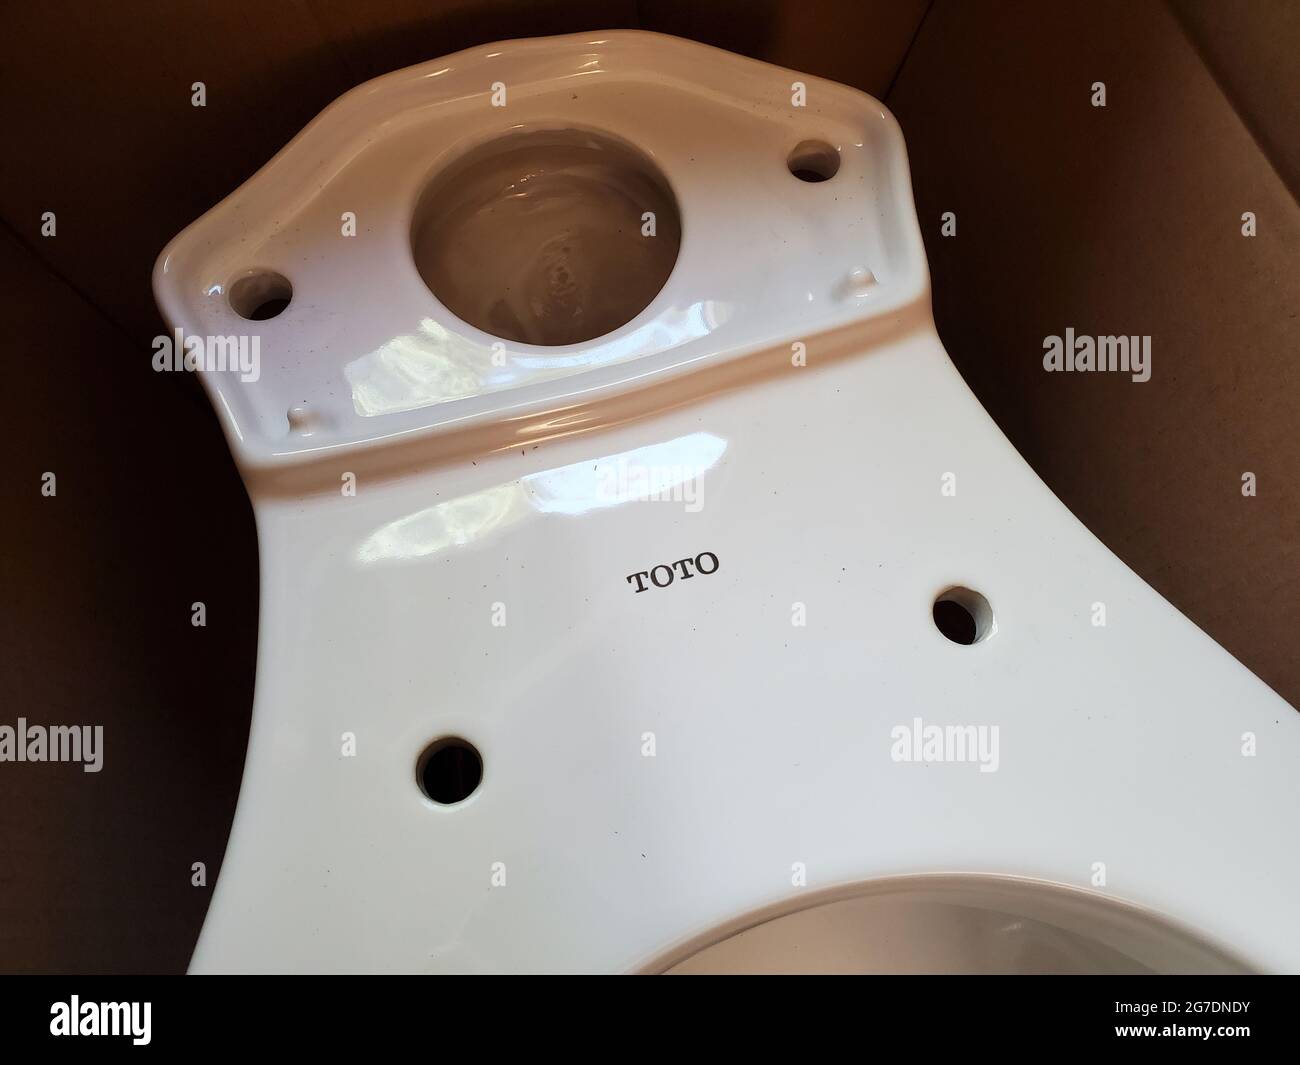 Close Up Shot Of The Logo For The Toilet Manufacturer Toto Visible On A Toilet Bowl In Lafayette California April 5 21 Stock Photo Alamy